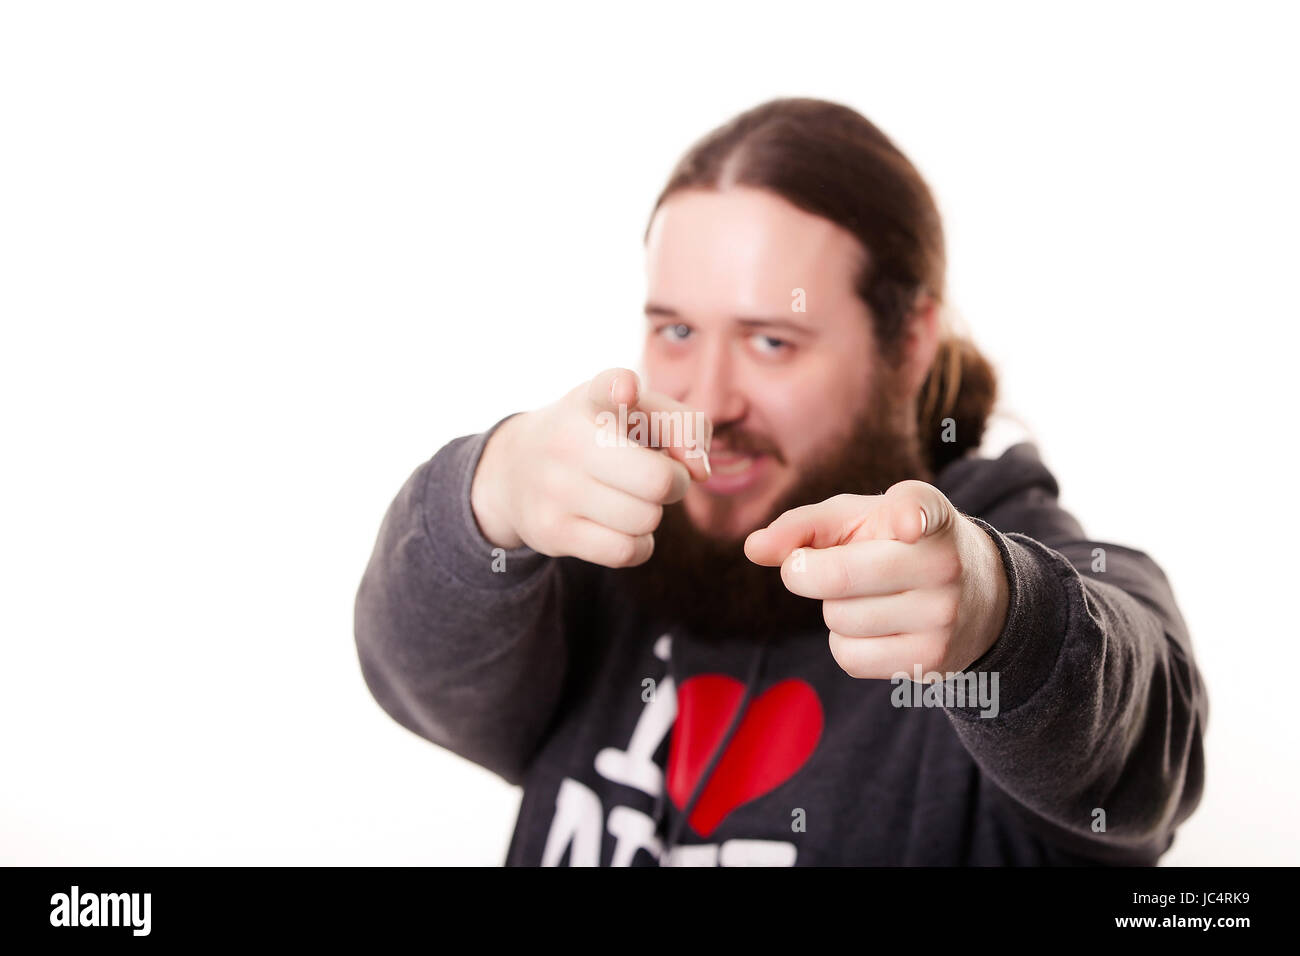 A finger from a person as if you are the next pointing to the straight, blurring background Stock Photo